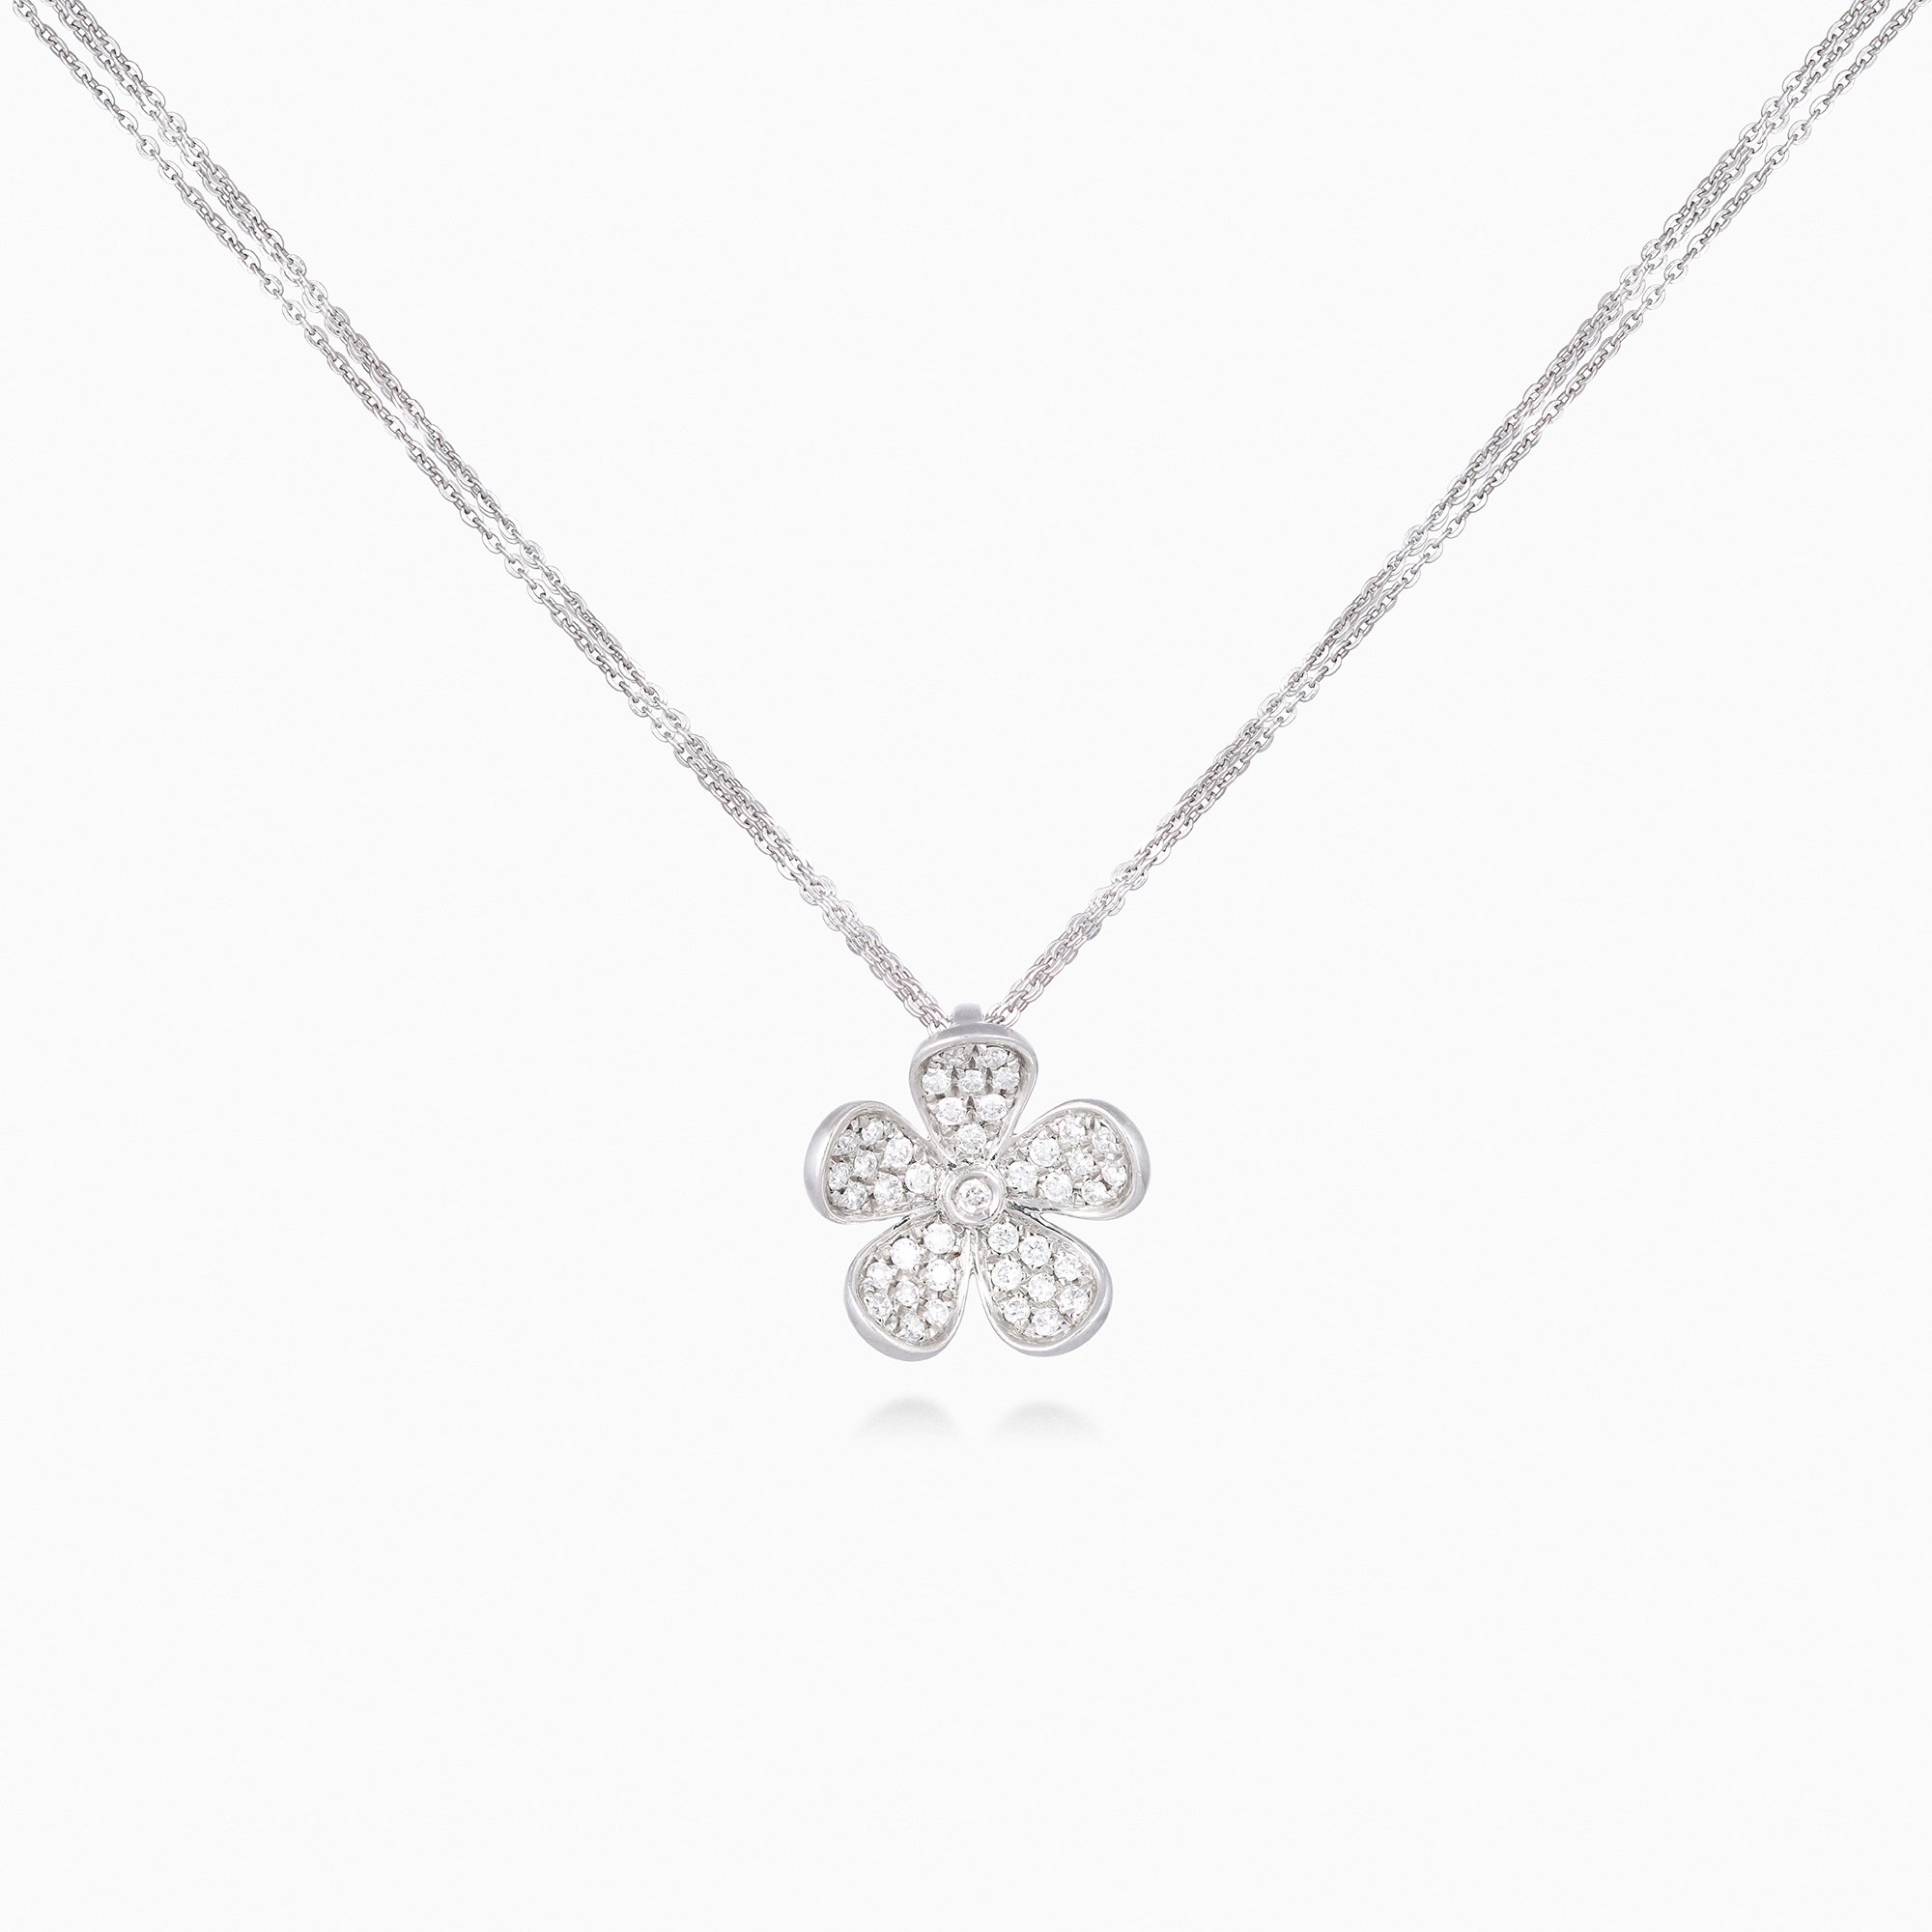 Buttercup White Gold and Diamond Multi Chain Flower Necklace.jpg